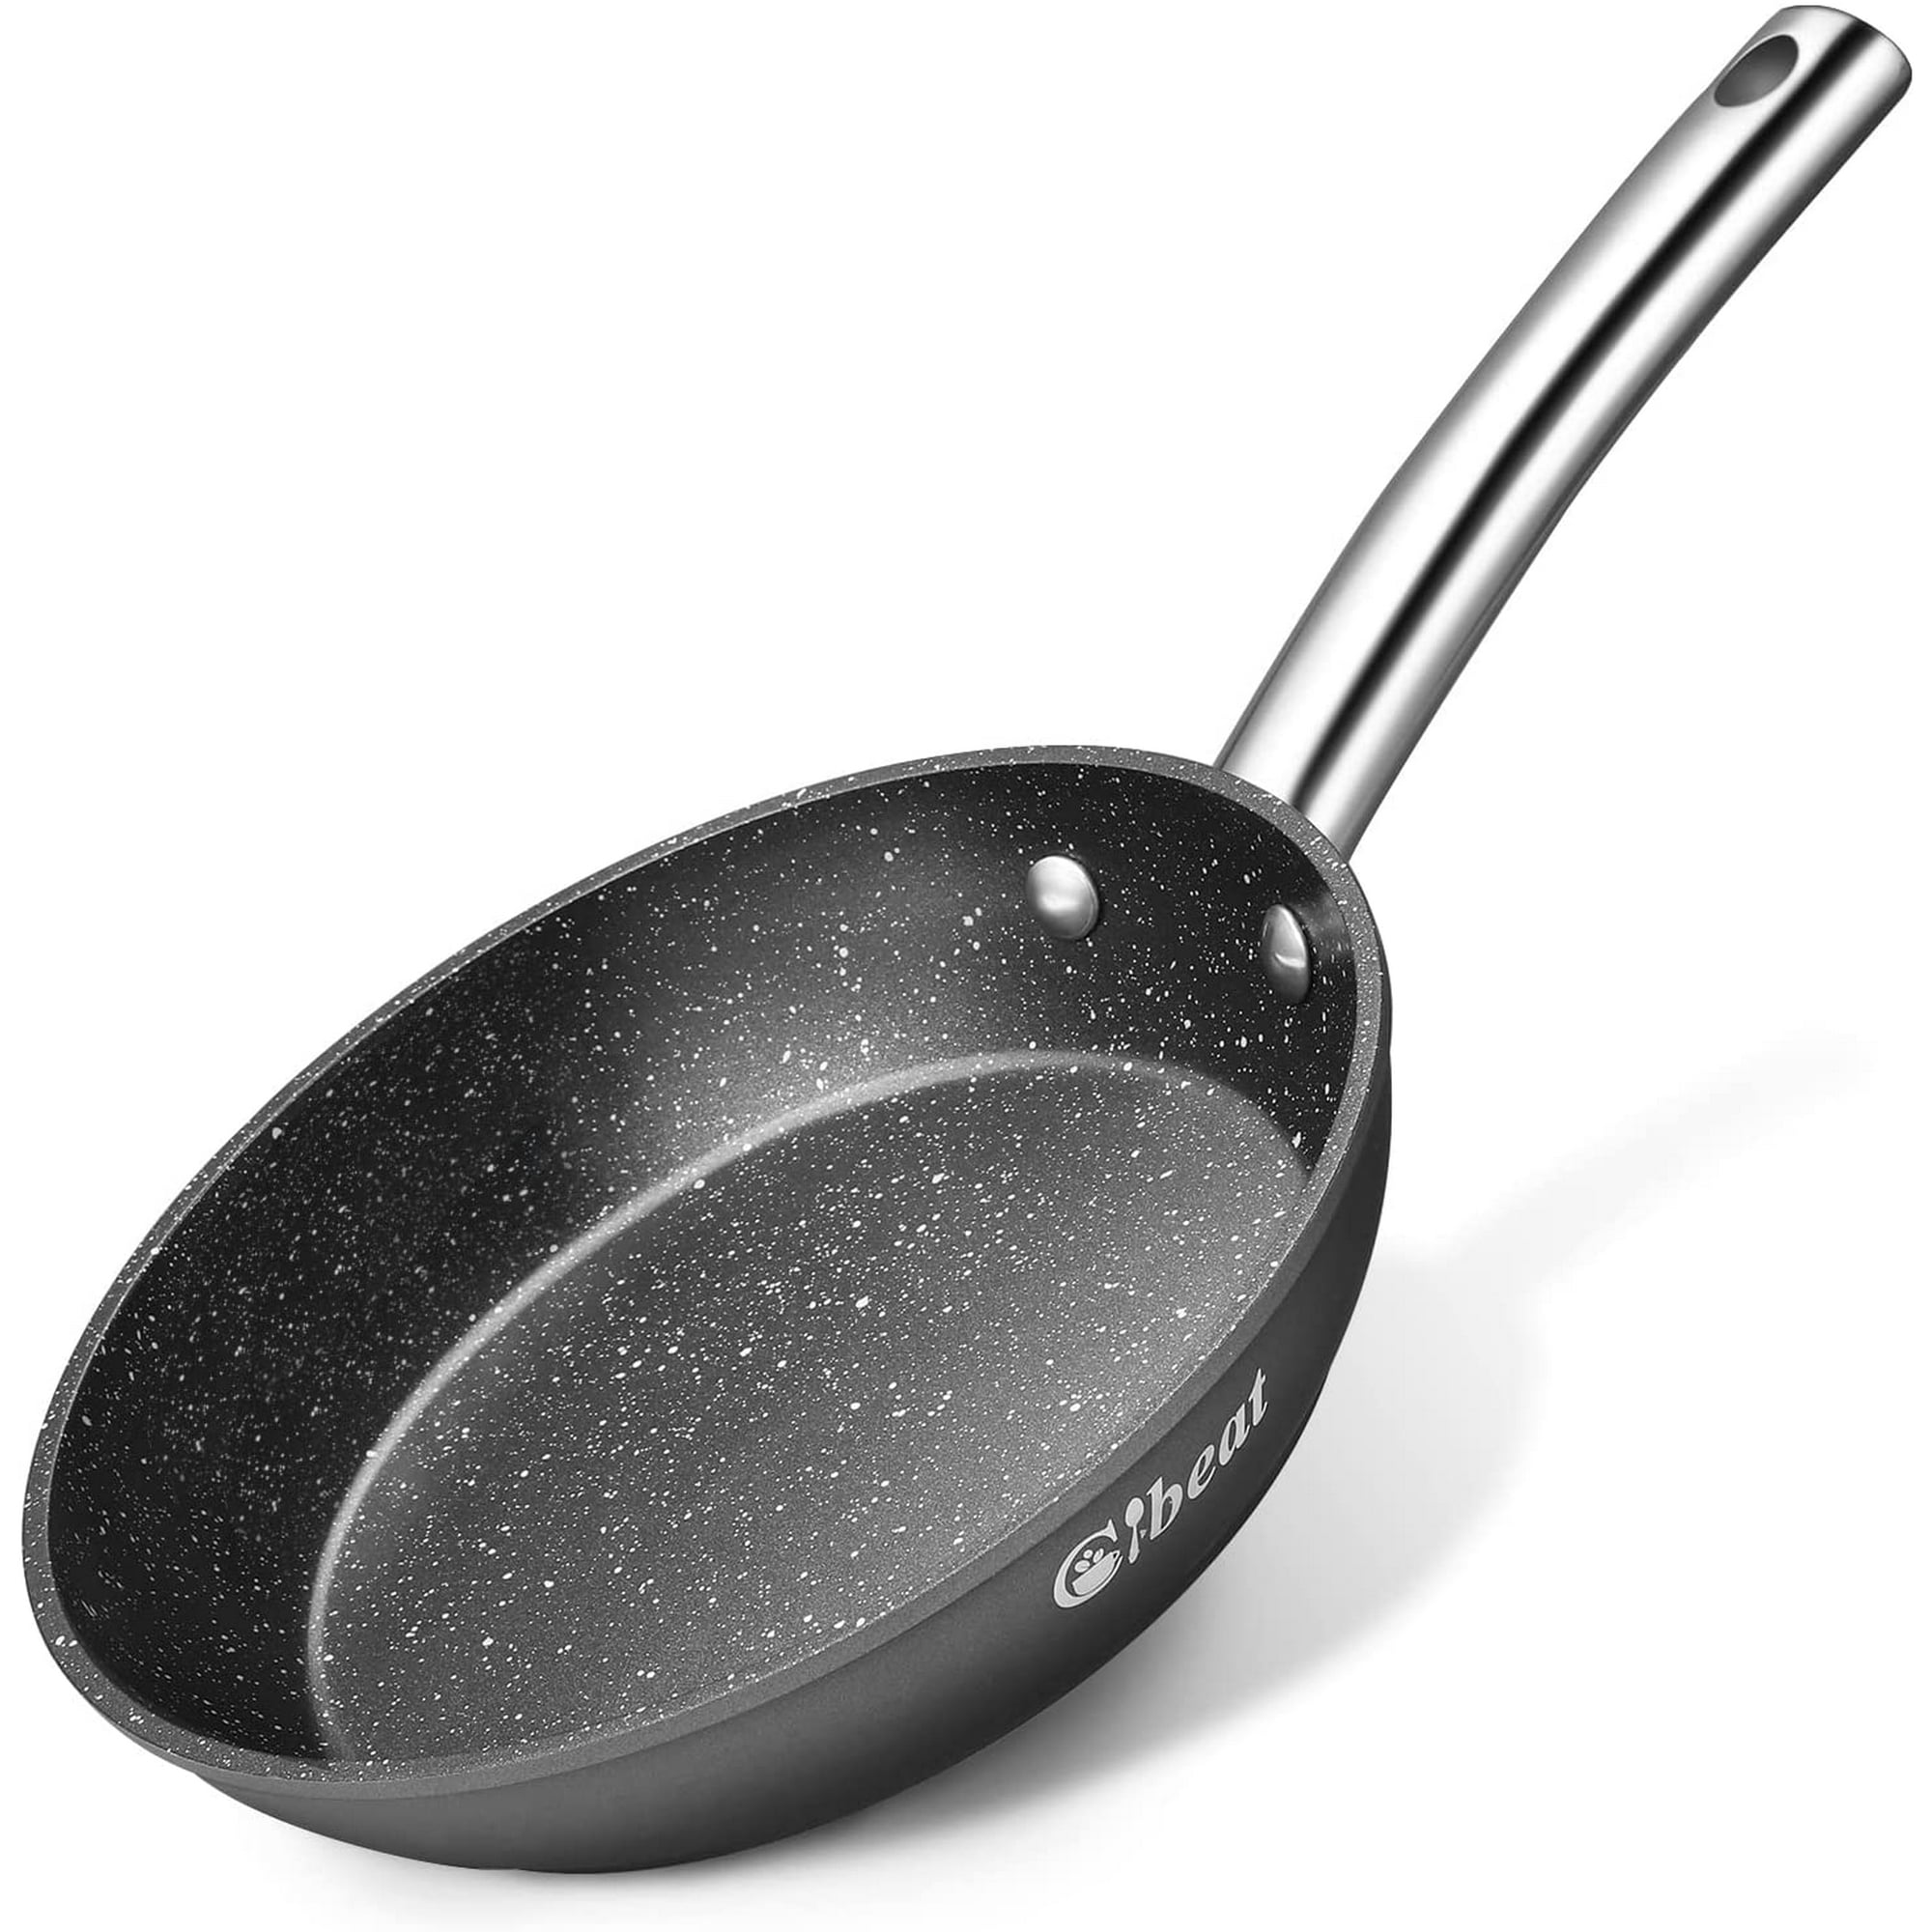 Nonstick Frying Pan with Lid for Cooking, Clatine Omelette Pan